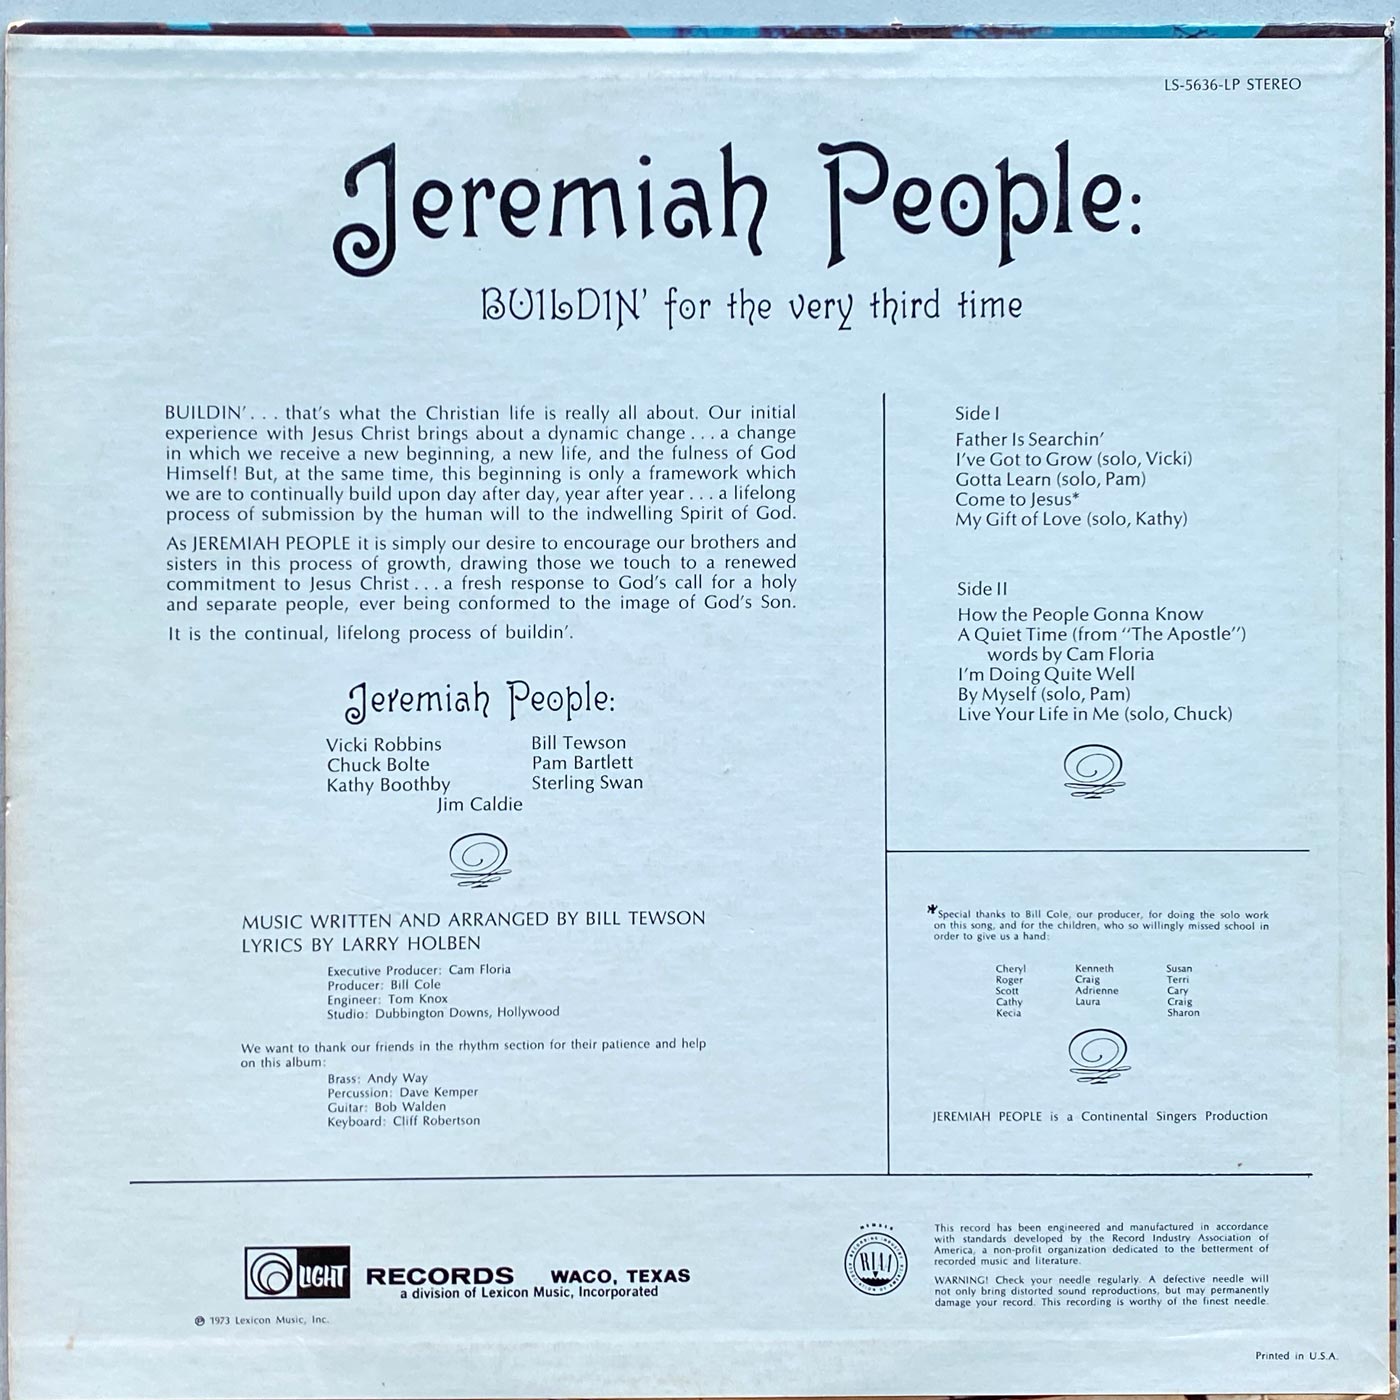 Jeremiah People - Buildin' for the very third time